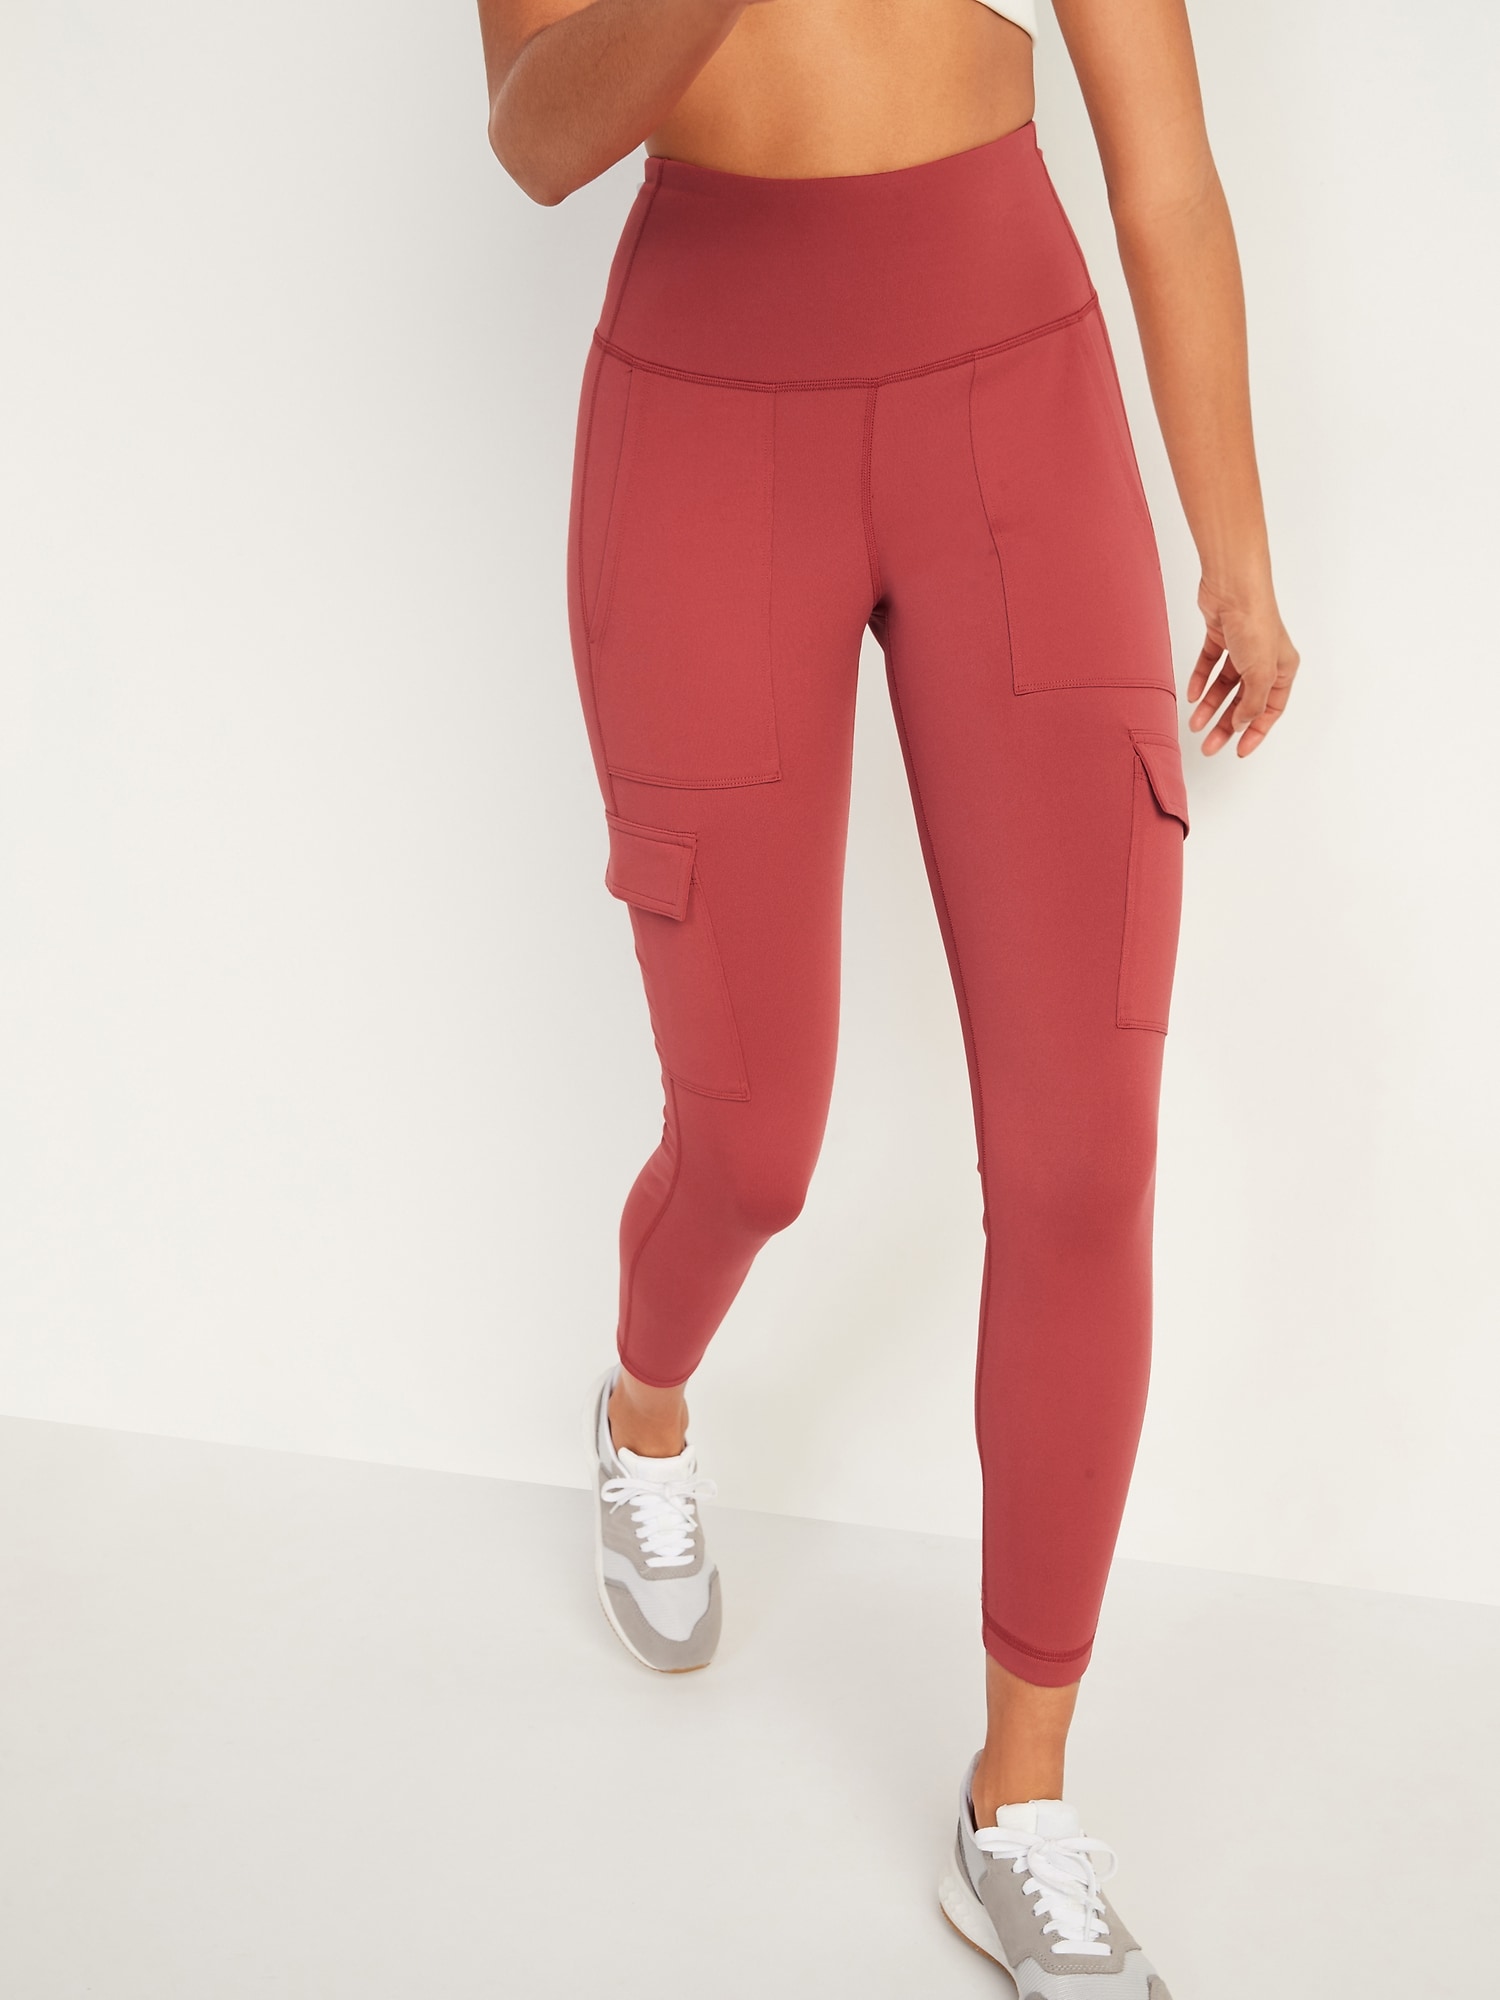 Old Navy - High-Waisted PowerPress 7/8-Length Compression Leggings